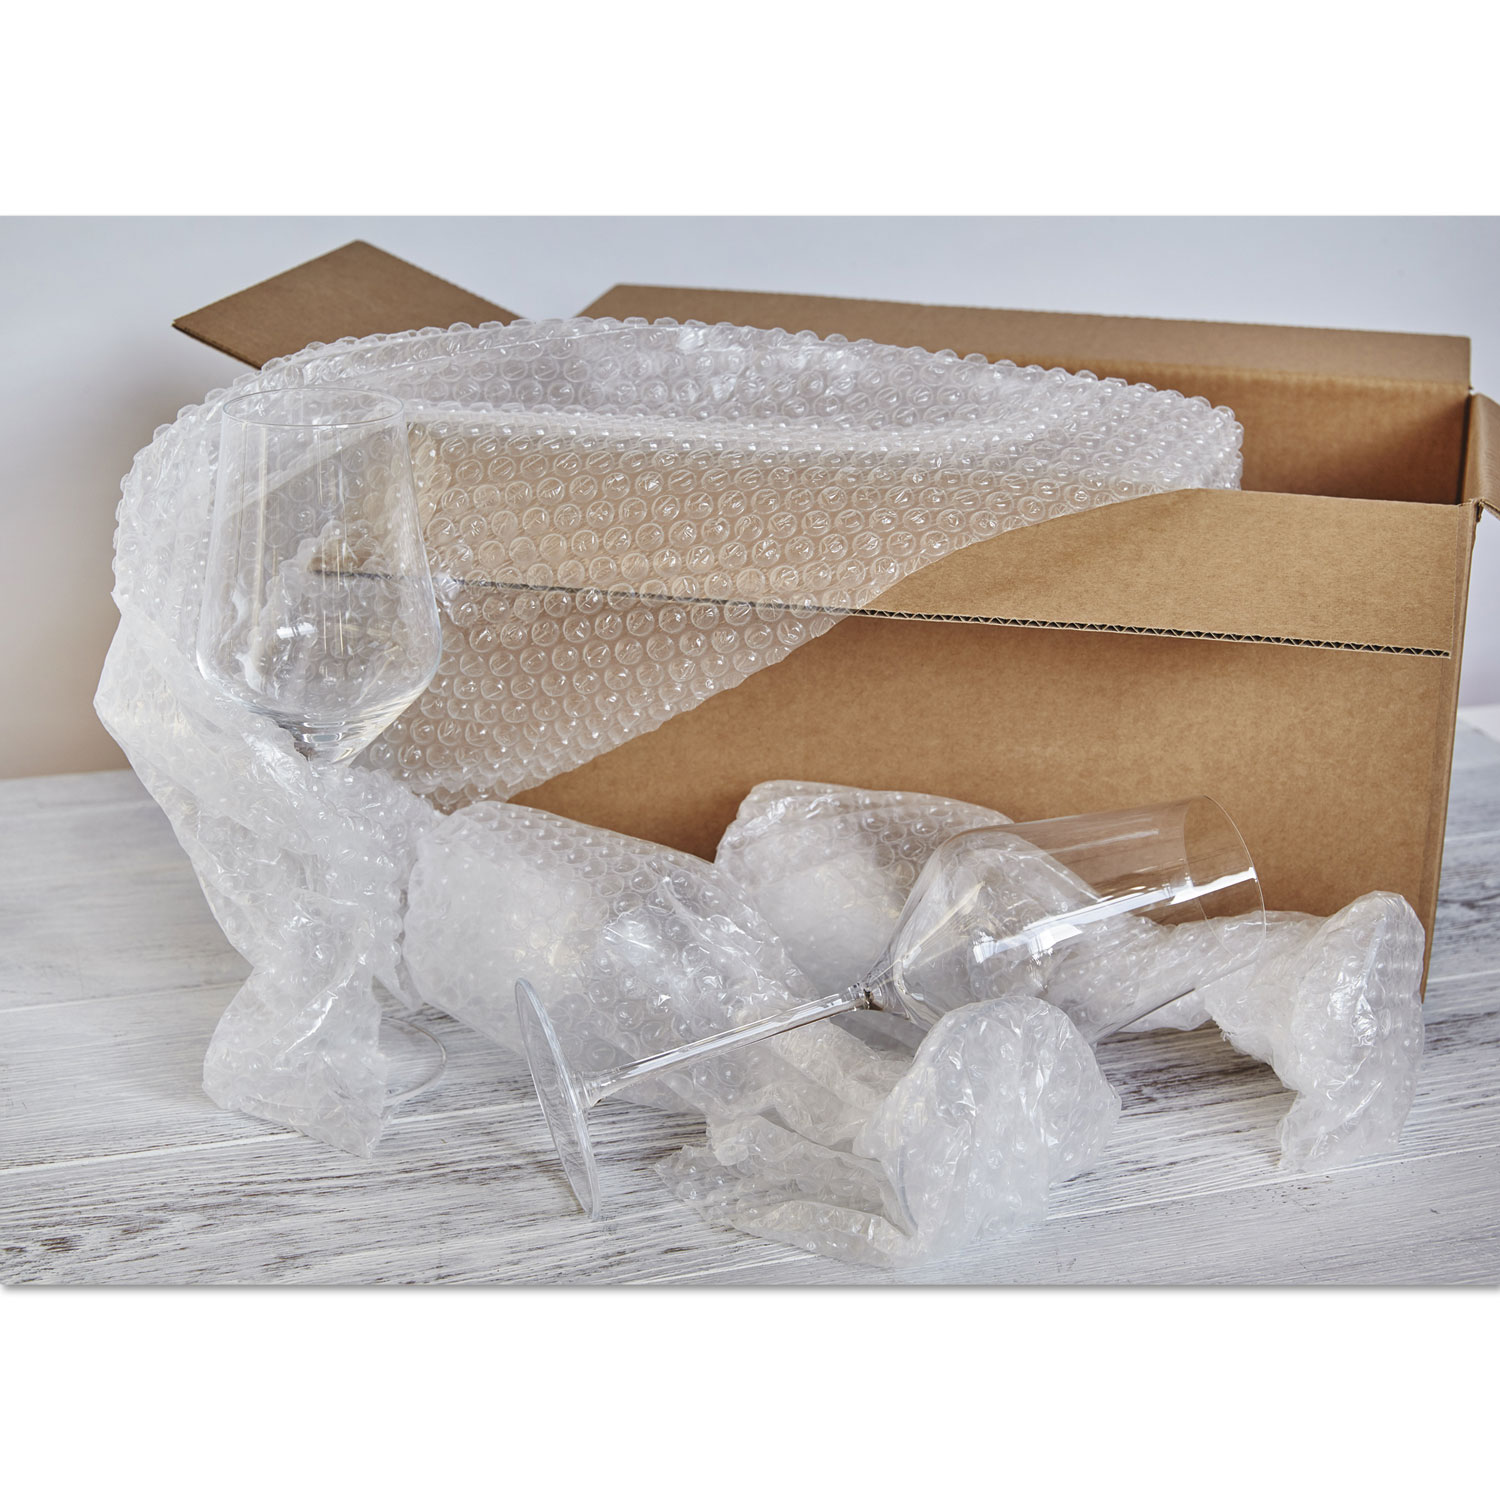 Bubble Wrap® Cushioning Material in Dispenser Box, 3/16 Thick, 12 x 175 ft.